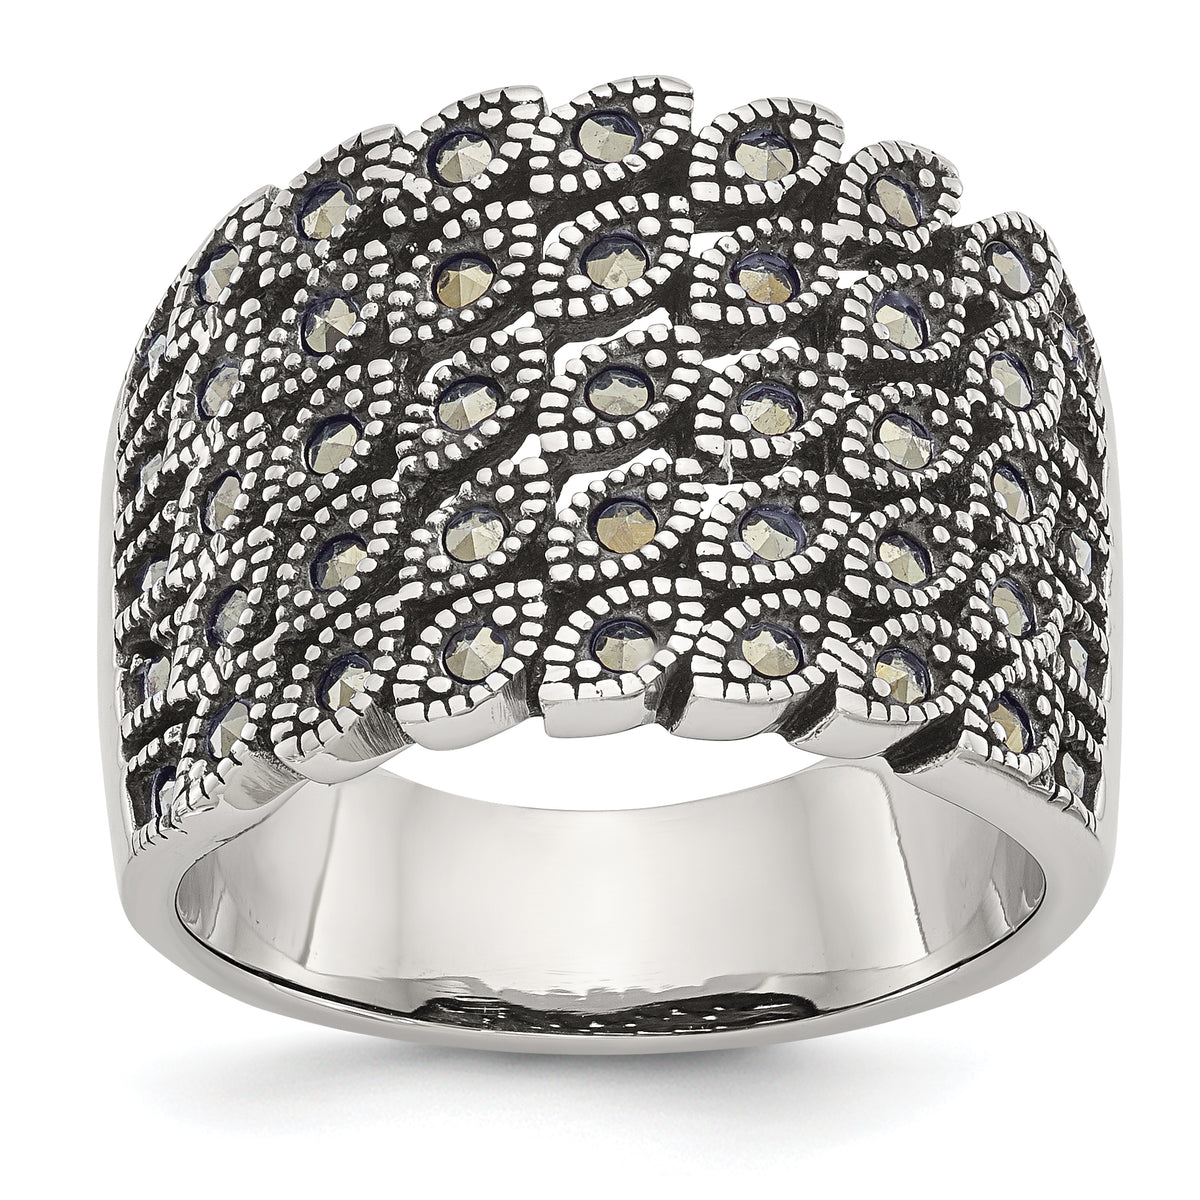 Stainless Steel Antiqued and Polished Marcasite Ring